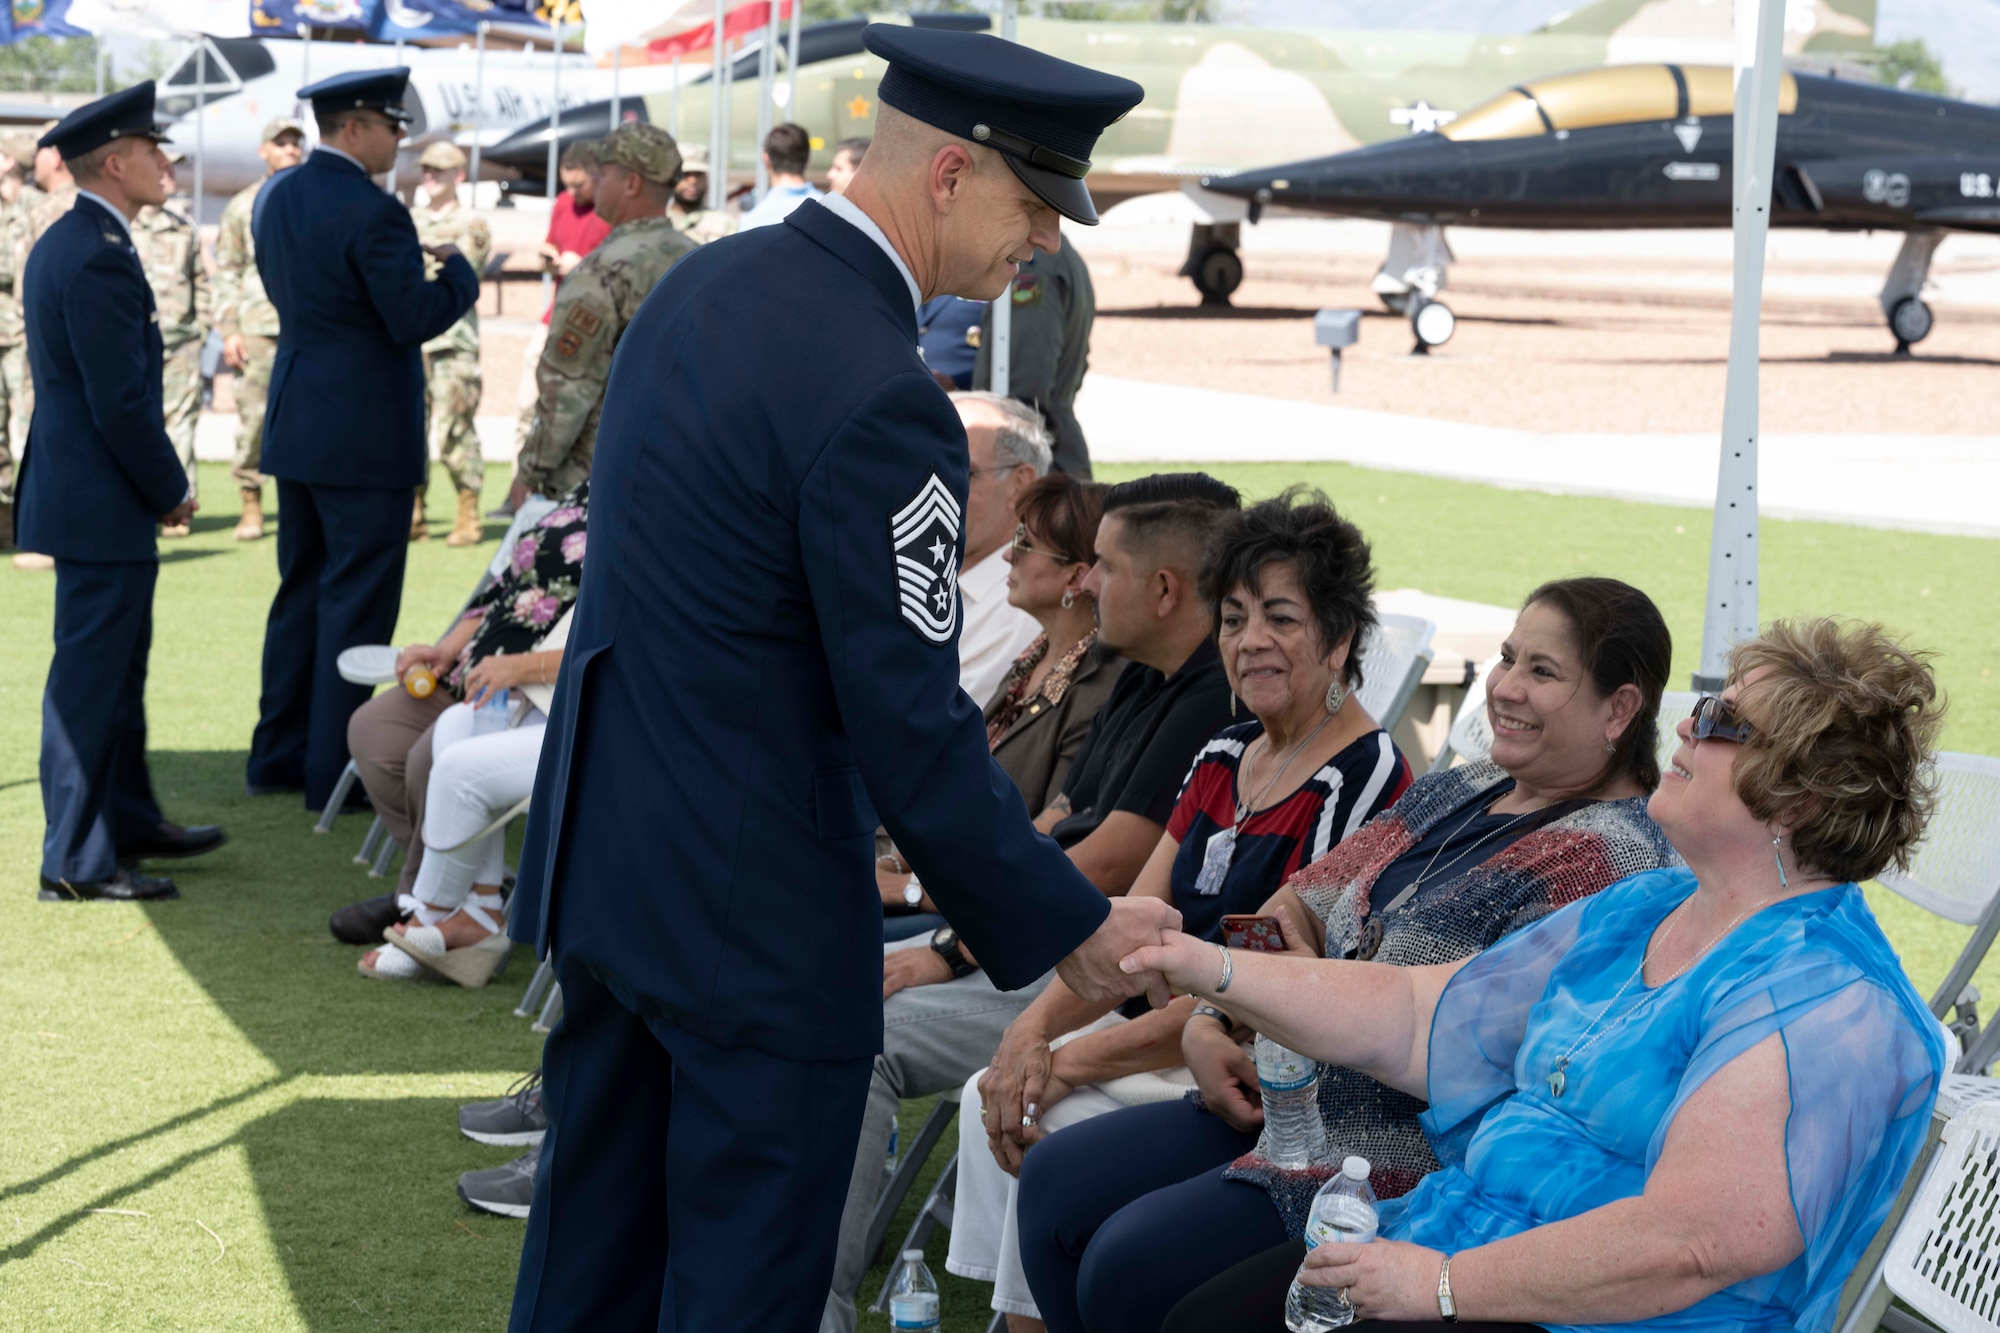 U.S. Air Force Chief Master Sgt. Jeffrey Martin, 49th Wing command chief, shakes the hand of Gold Star Mom, Susan Misener, at Holloman Air Force Base, New Mexico, May 25, 2023. Gold Star Moms are mothers to active-duty service members who die, while serving in the United States Armed Forces. (U.S. Air Force photo by Airman 1st Class Michelle Ferrari)